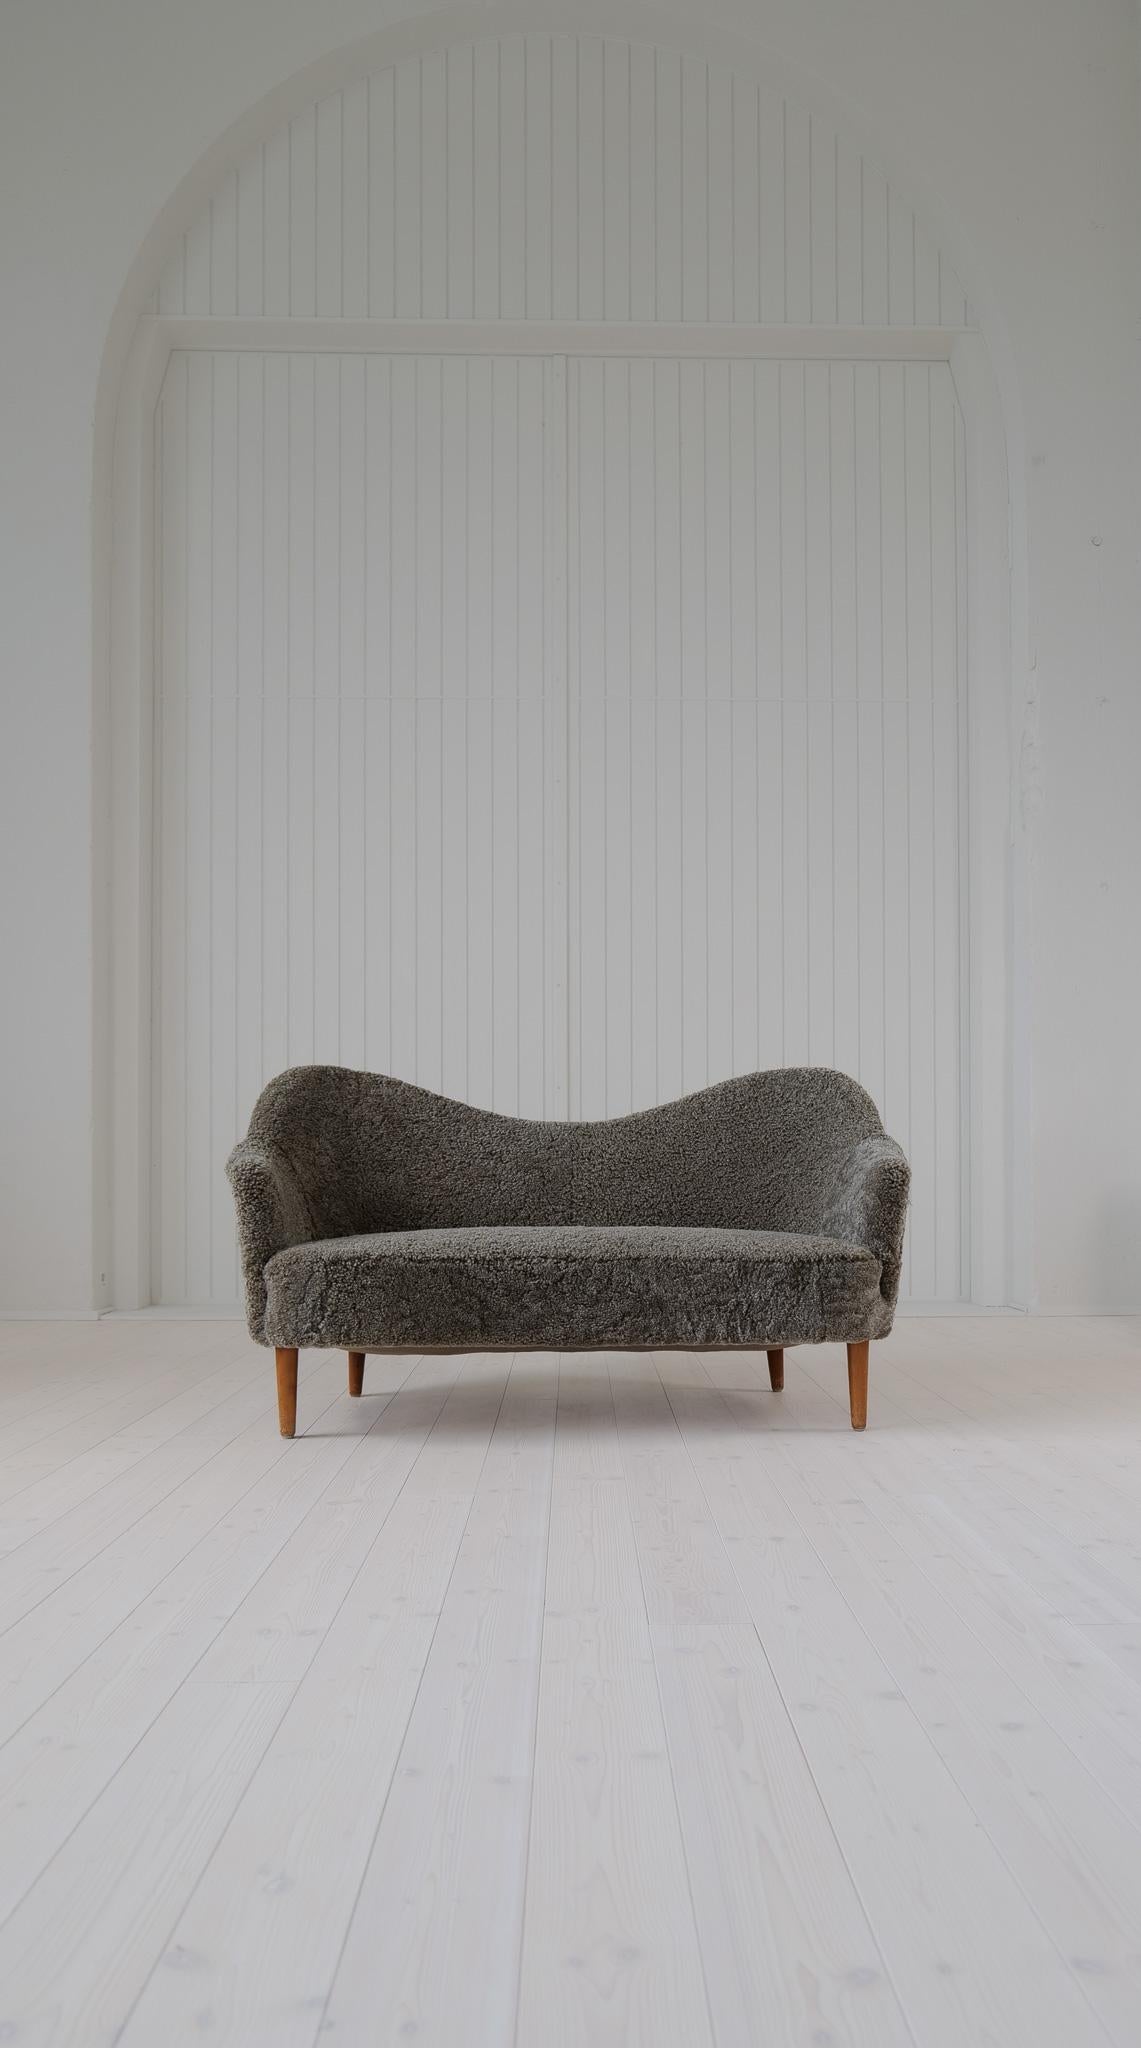 This model” Samspel” sofa was designed by Carl Malmsten in 1956 and manufactured during that time at AB Record Bollnäs Sweden. The sofa has been fully reupholstered and now have its beautiful famous lines made in 